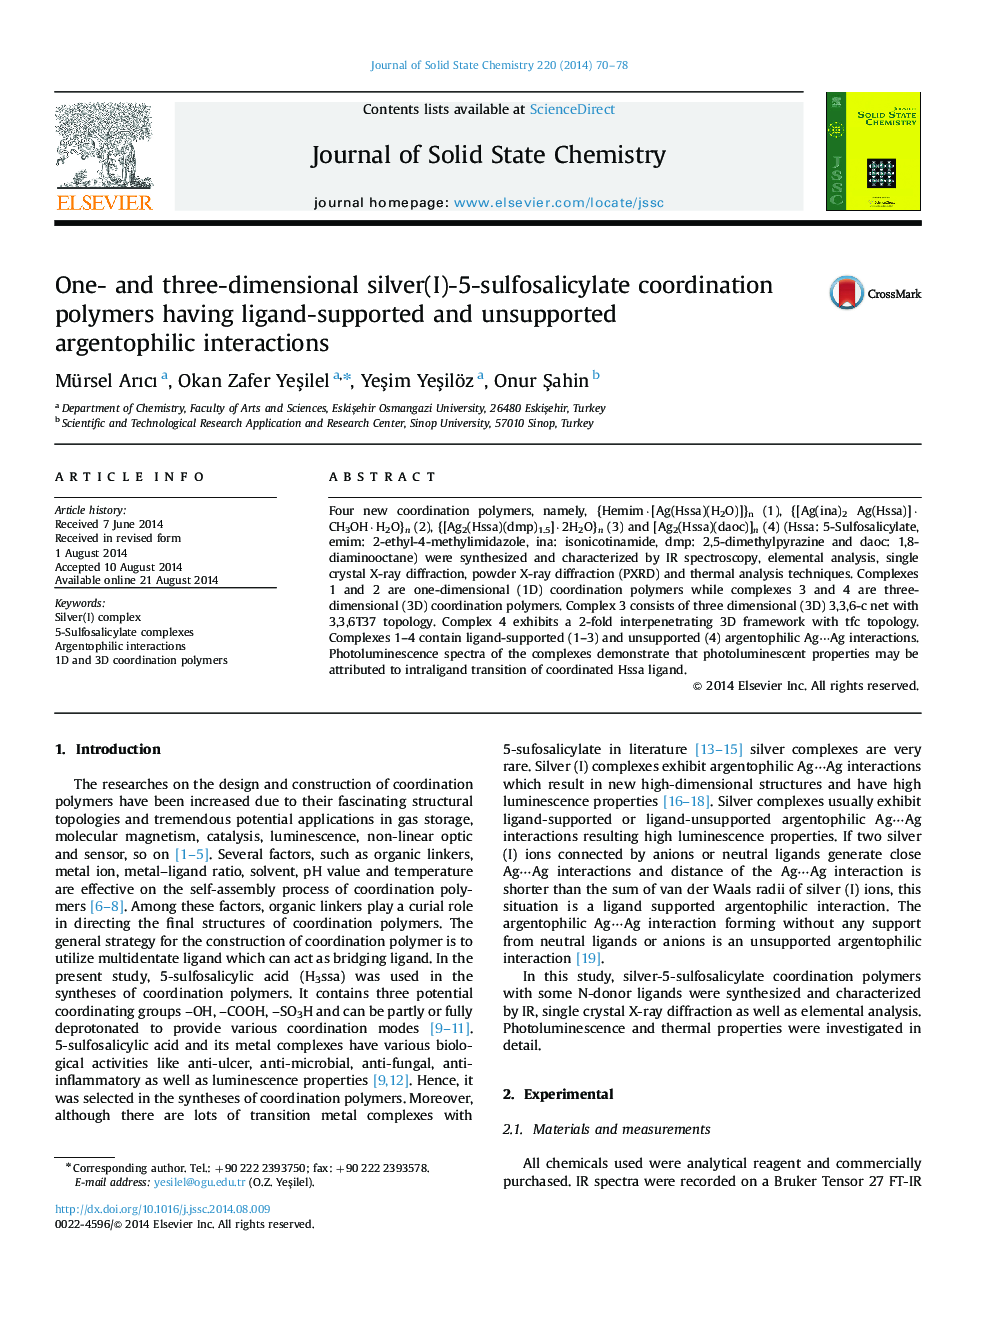 One- and three-dimensional silver(I)-5-sulfosalicylate coordination polymers having ligand-supported and unsupported argentophilic interactions